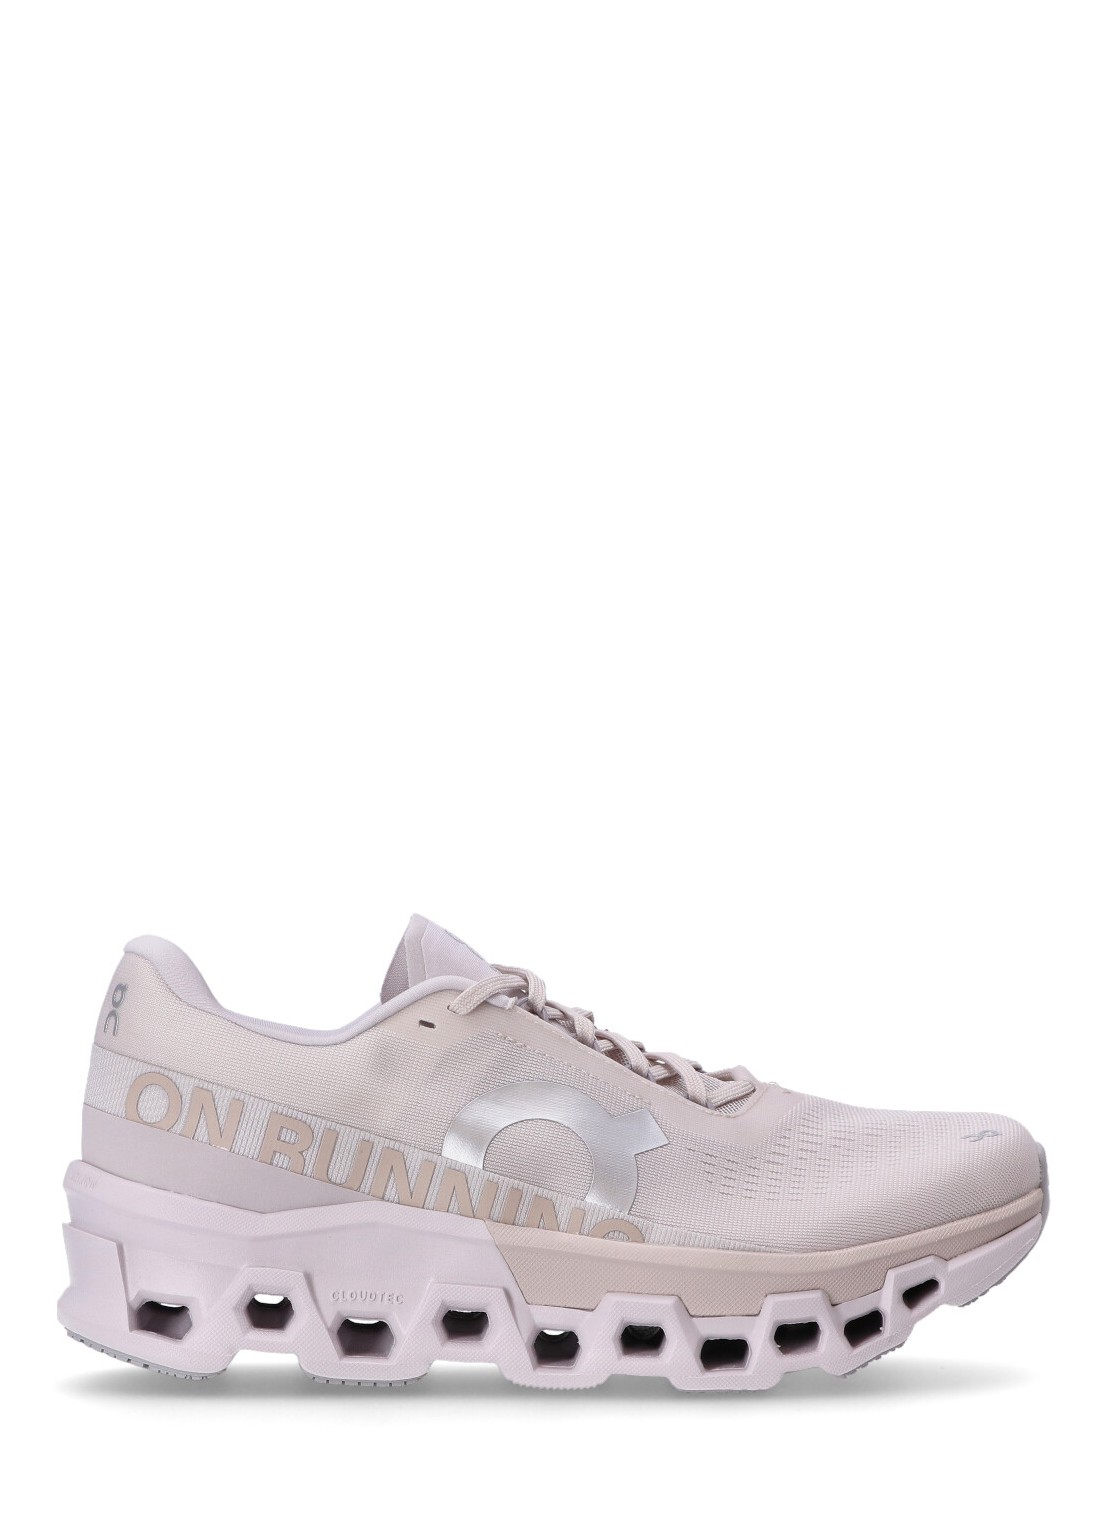 Sneaker on running sneaker mancloudmonster 2 pad exclusive - 3me10120838 sand frost talla 46
 